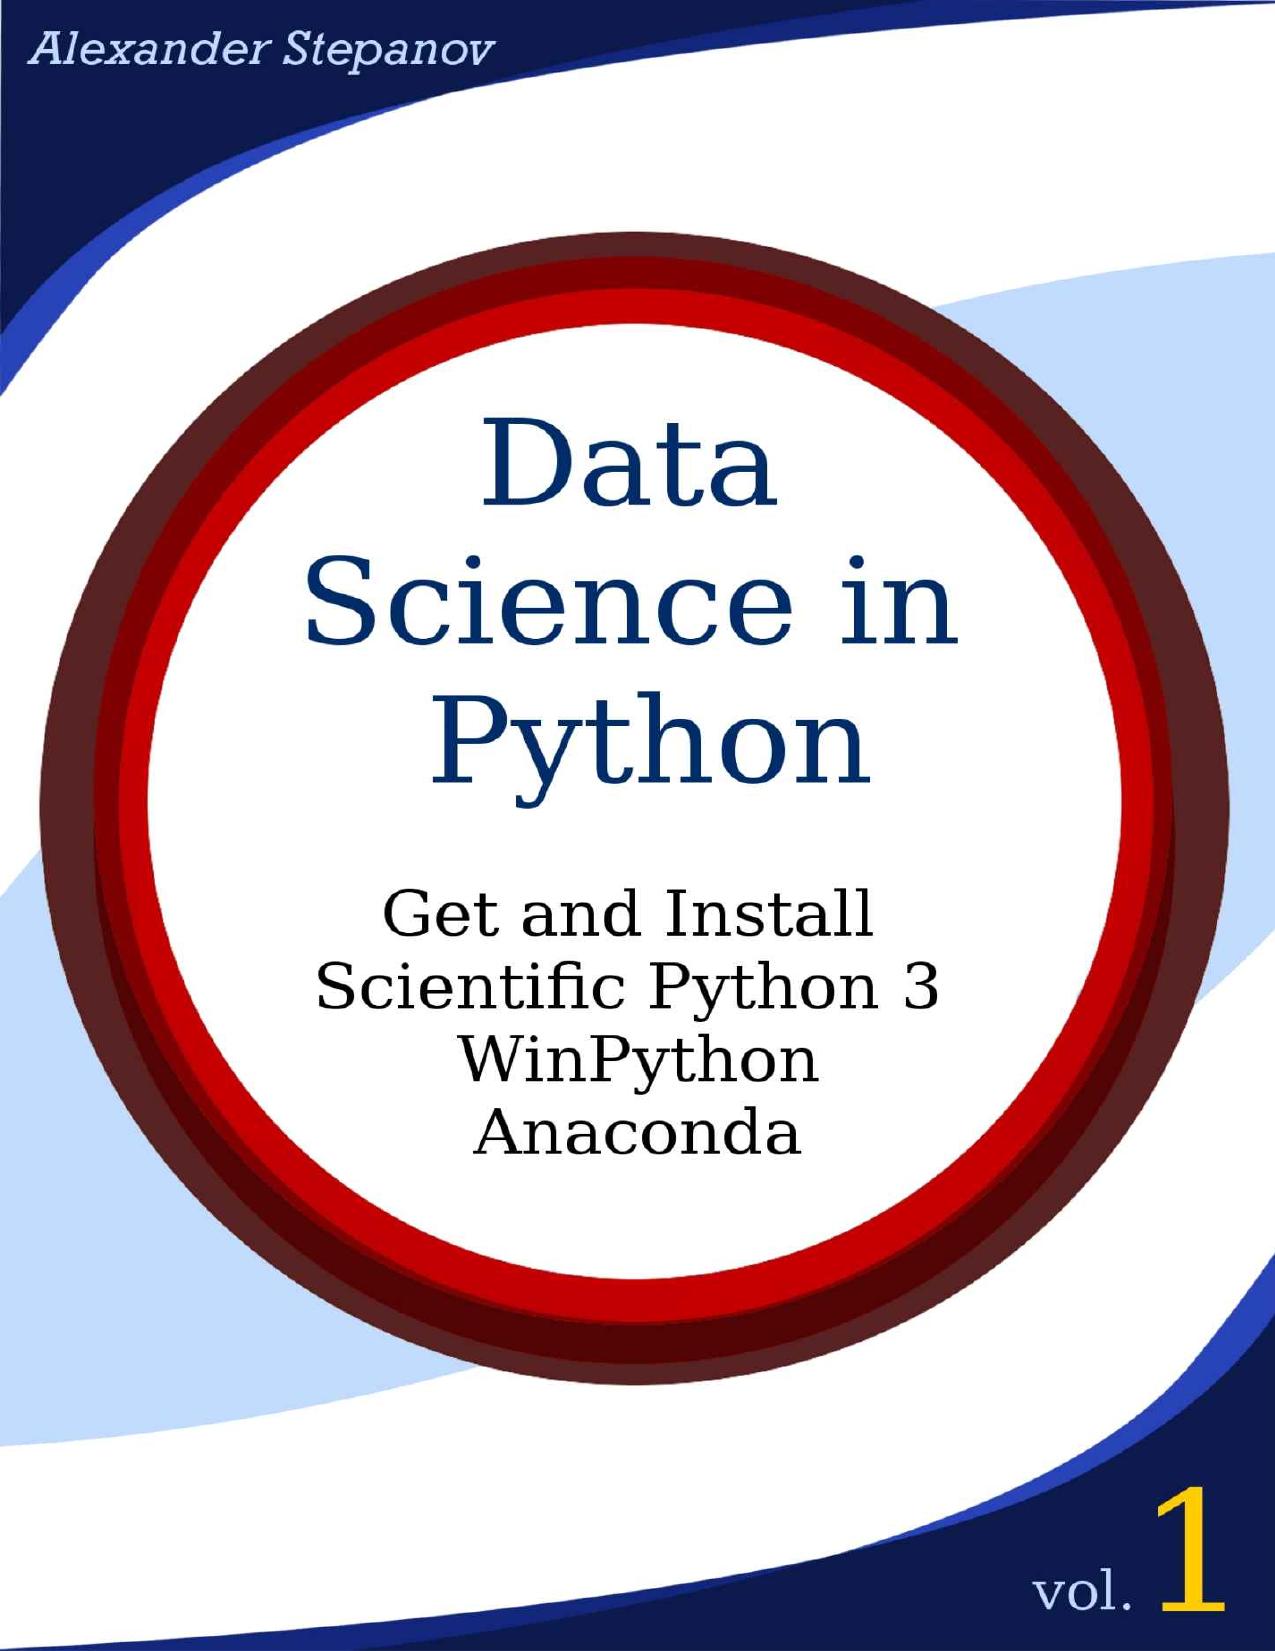 Stepanov A. Data Science in Python Vol 1. Get and Install Scientific...2017 by Zamzar